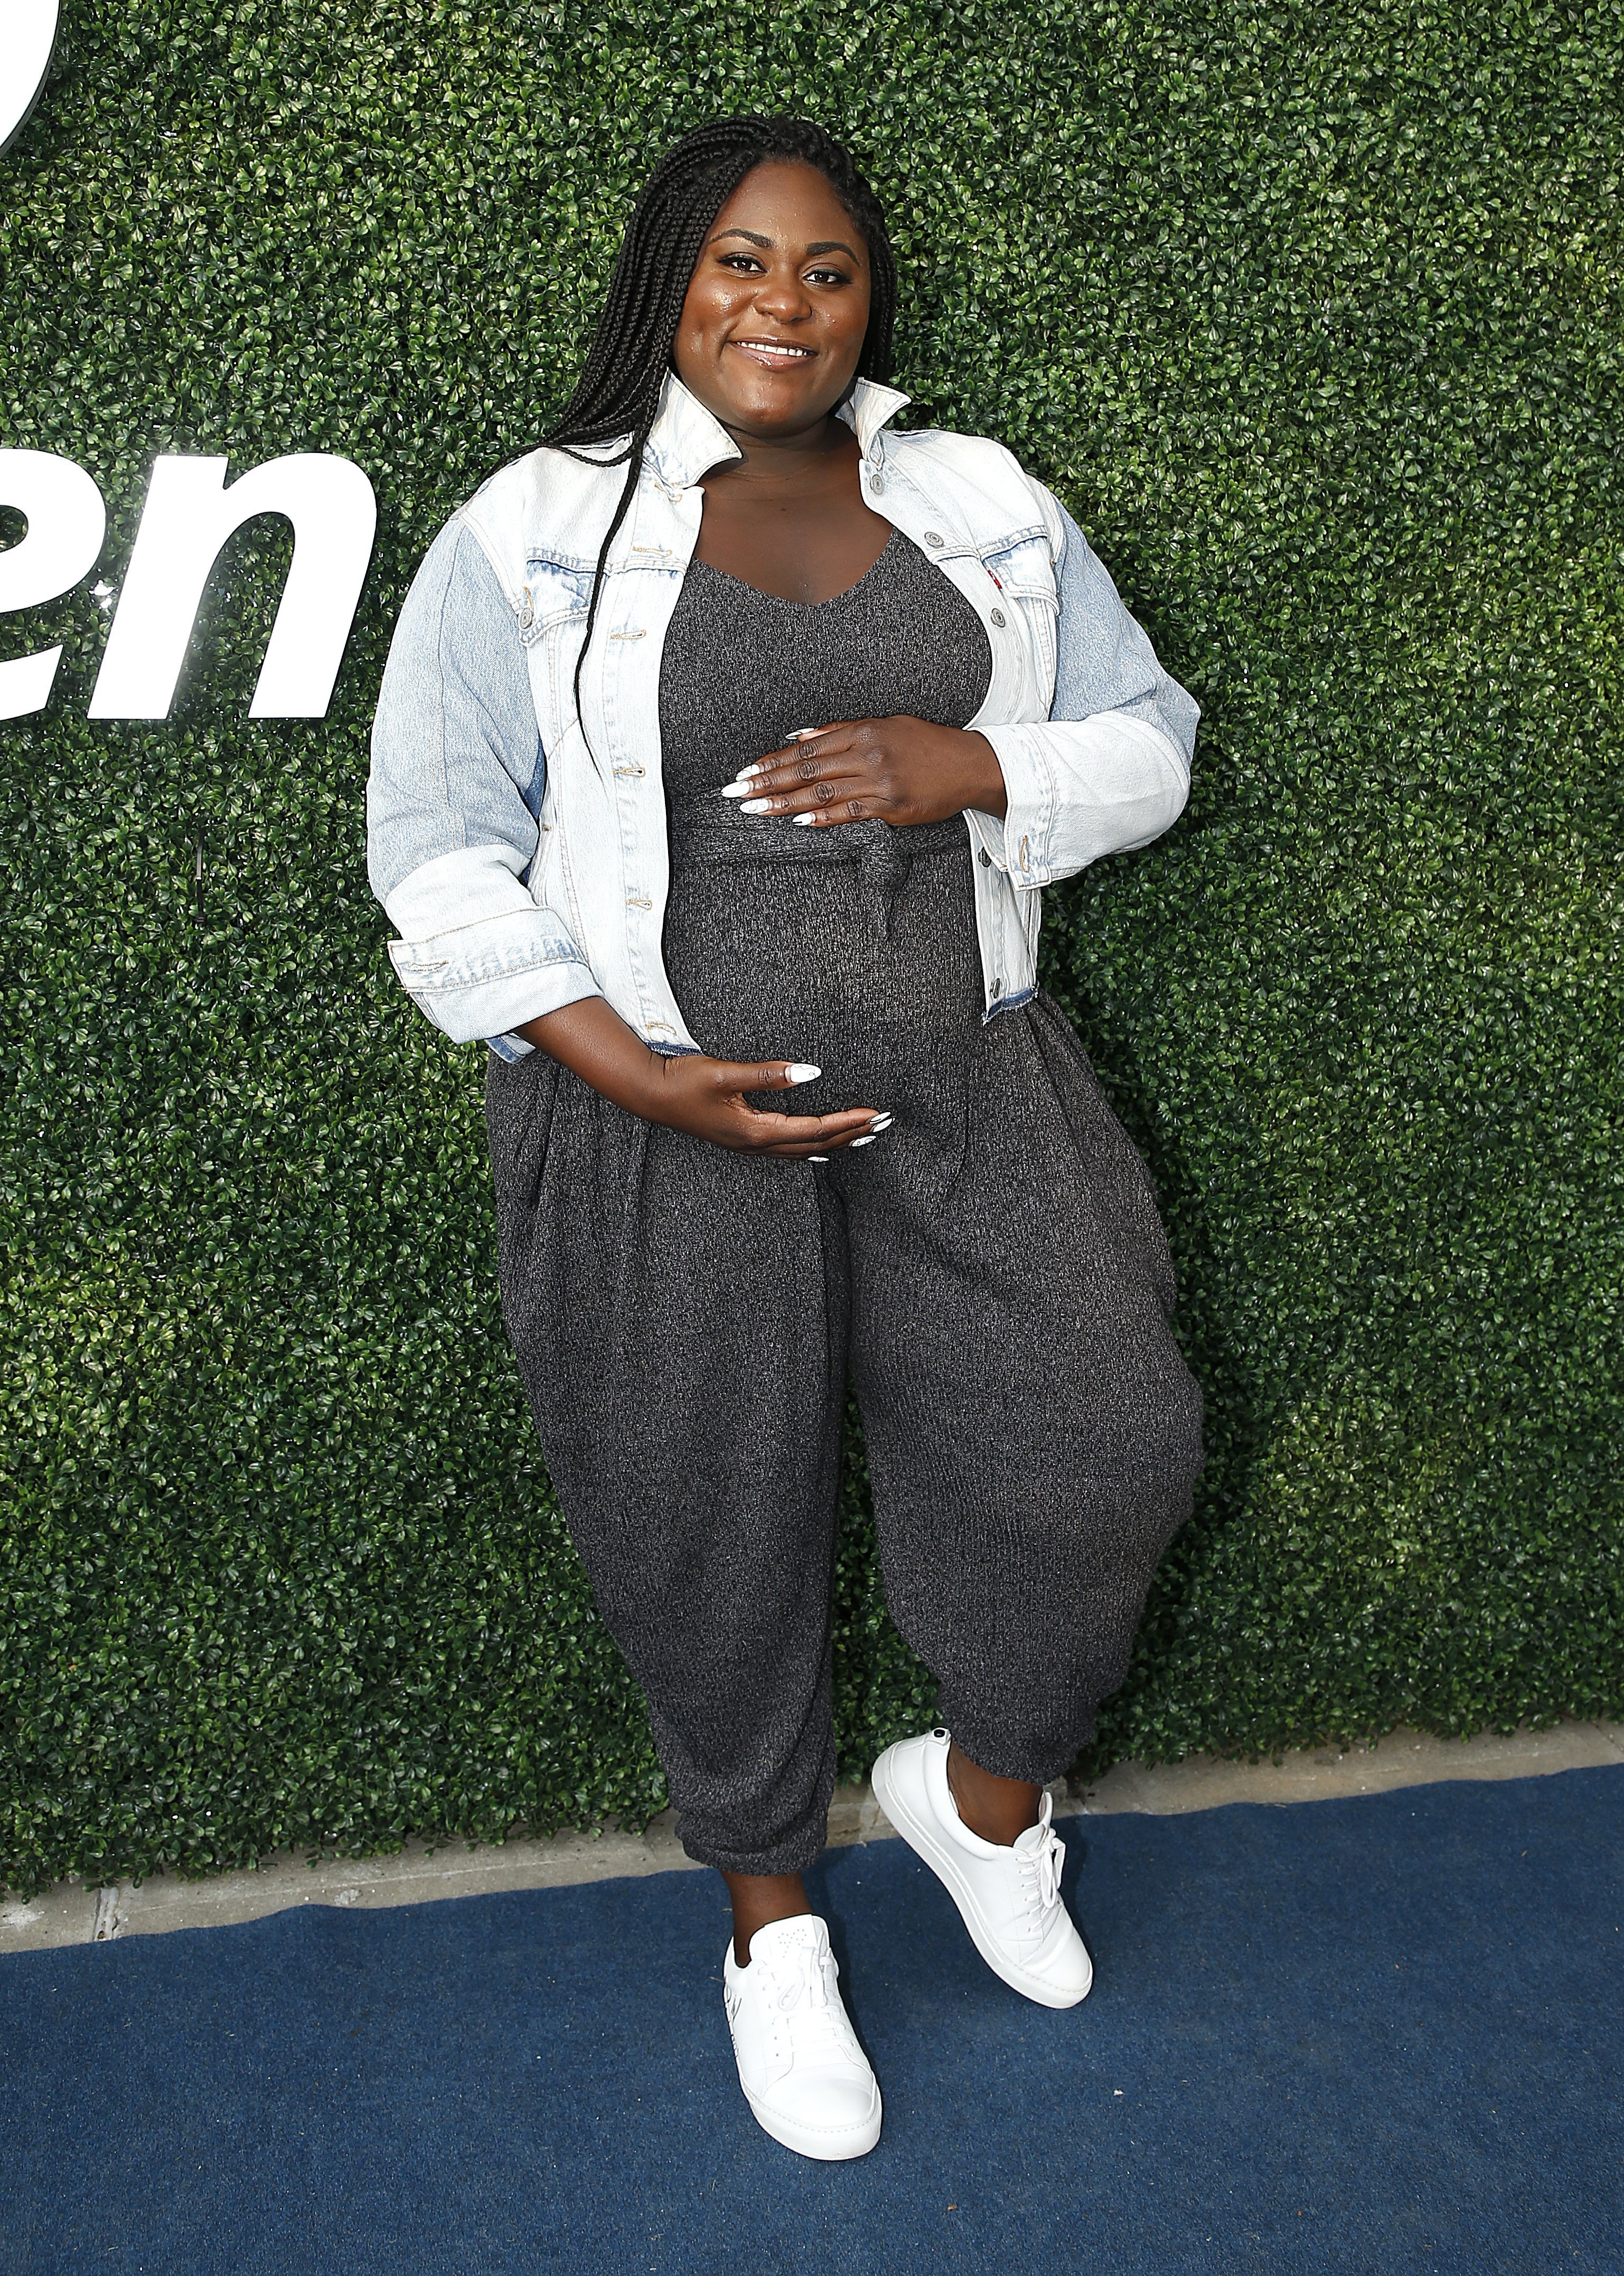 Pregnant star Danielle Brooks flaunts her belly in August 2019. | Photo: Getty Images